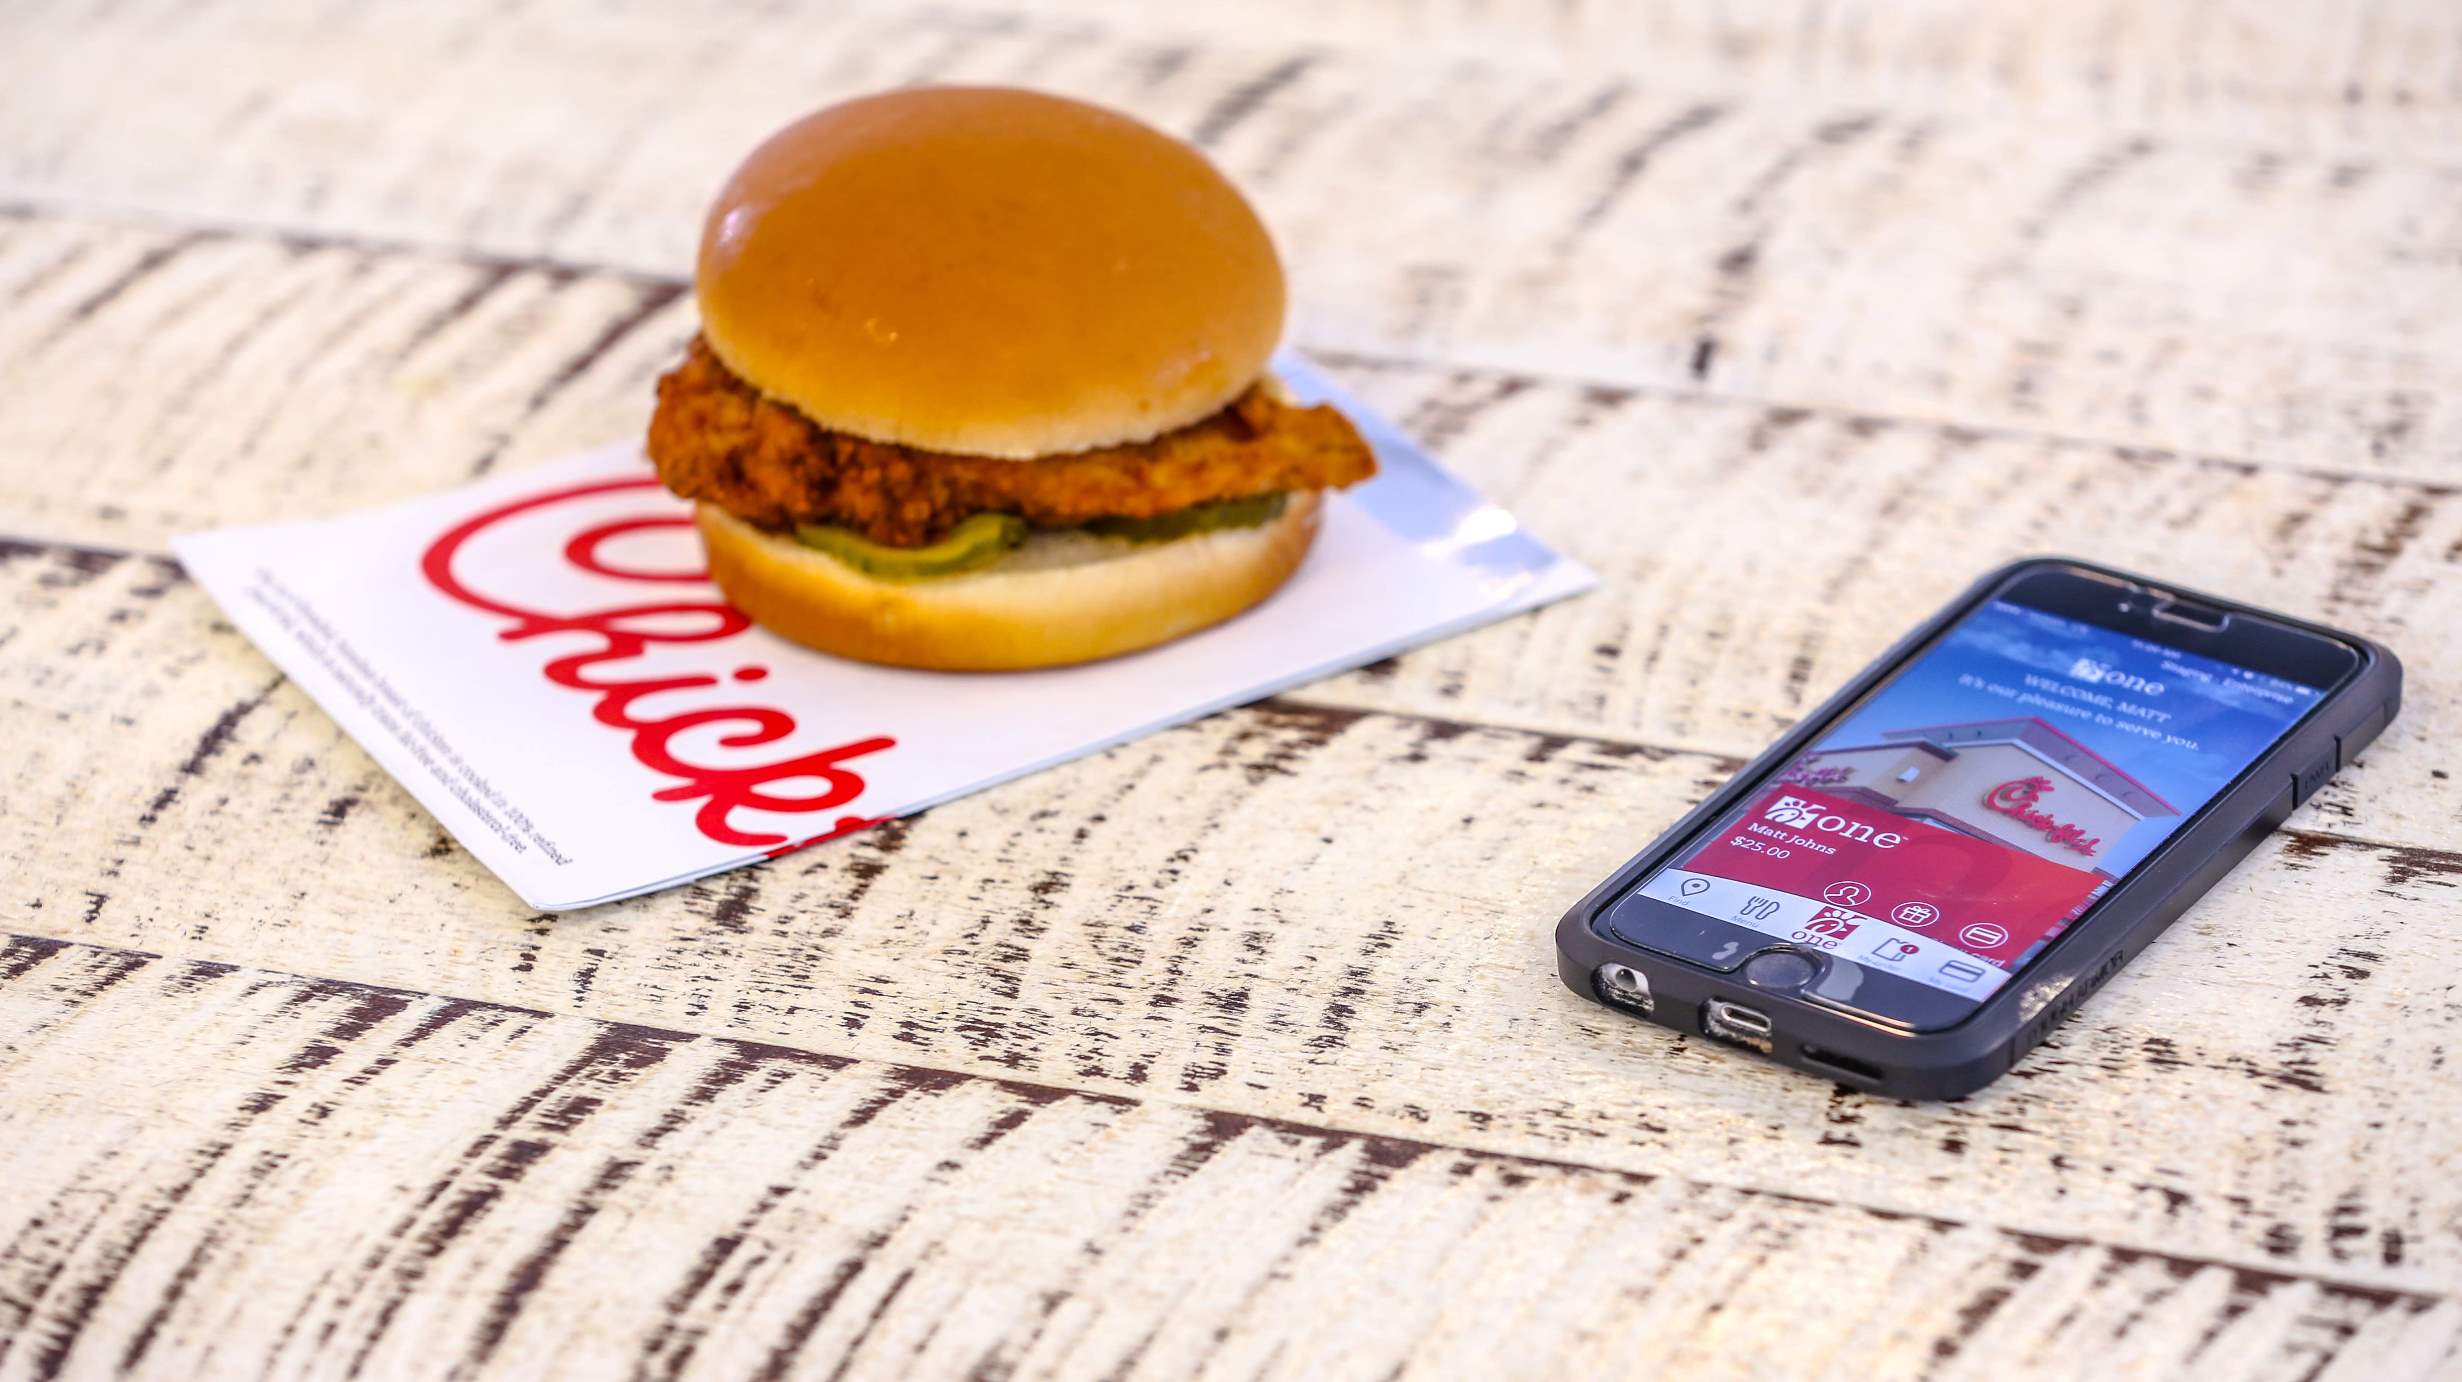 ChickfilA launches “ChickfilA One” App and free sandwich ChickfilA